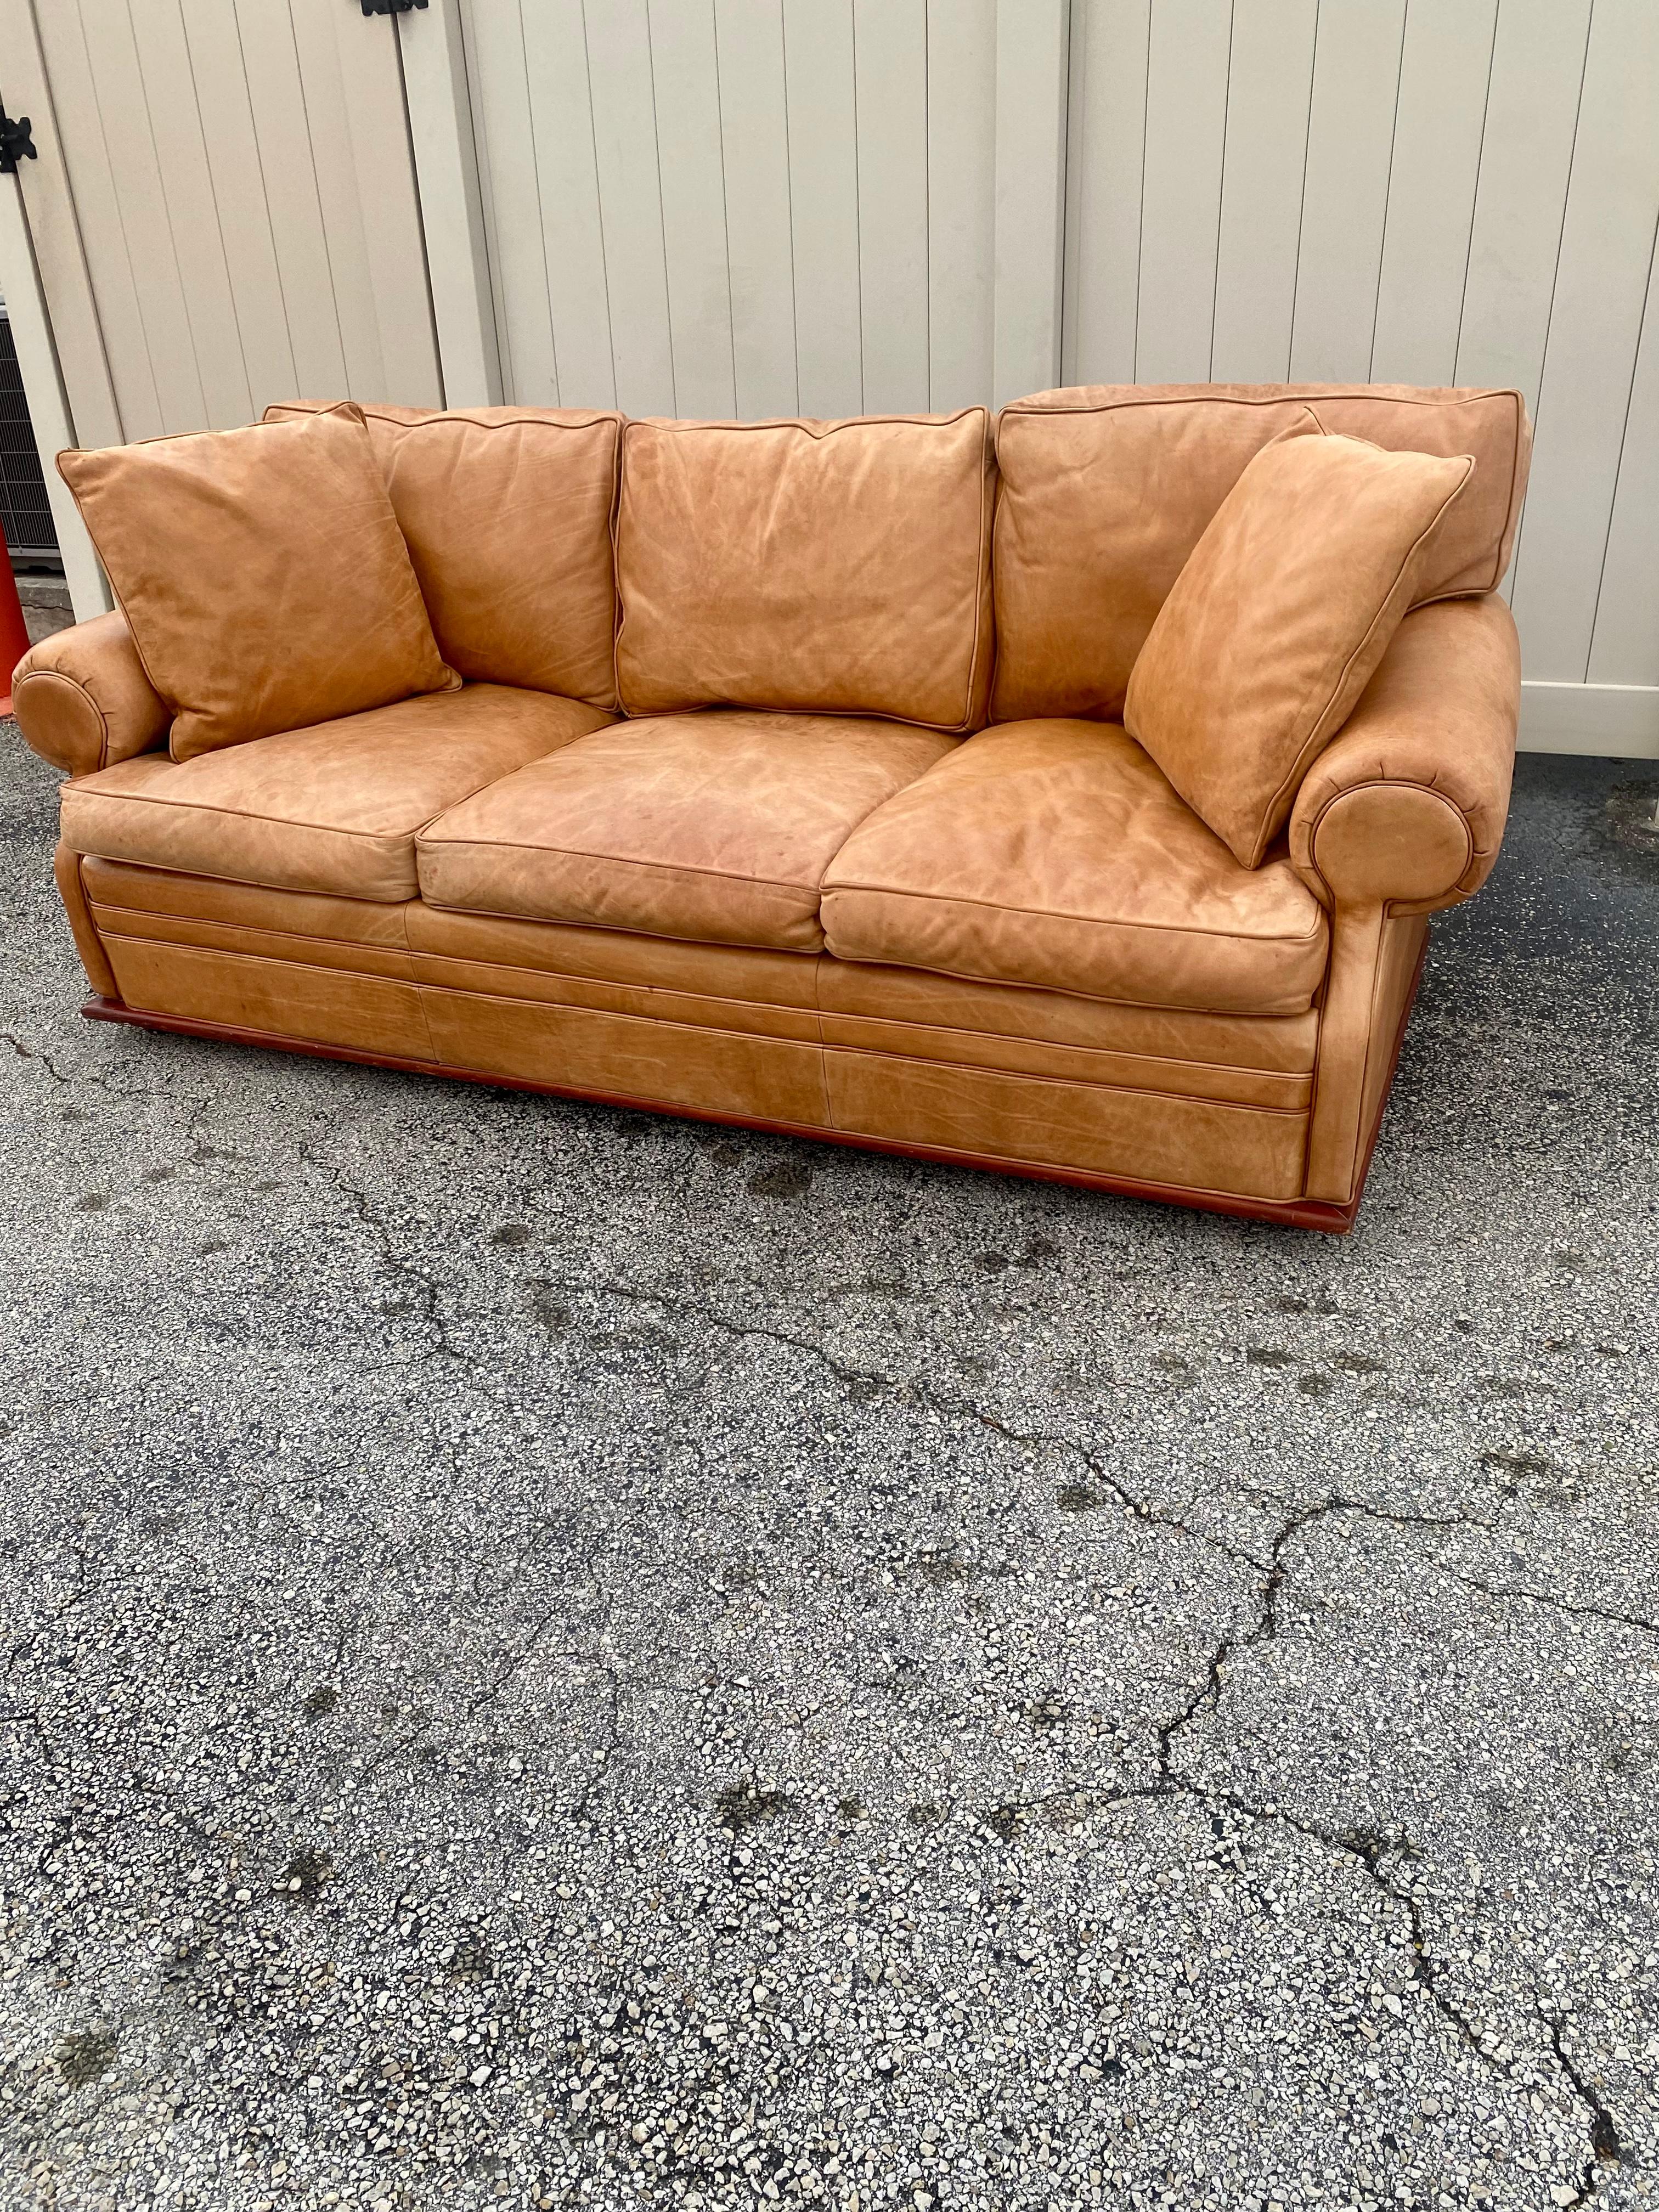 saddle leather couch